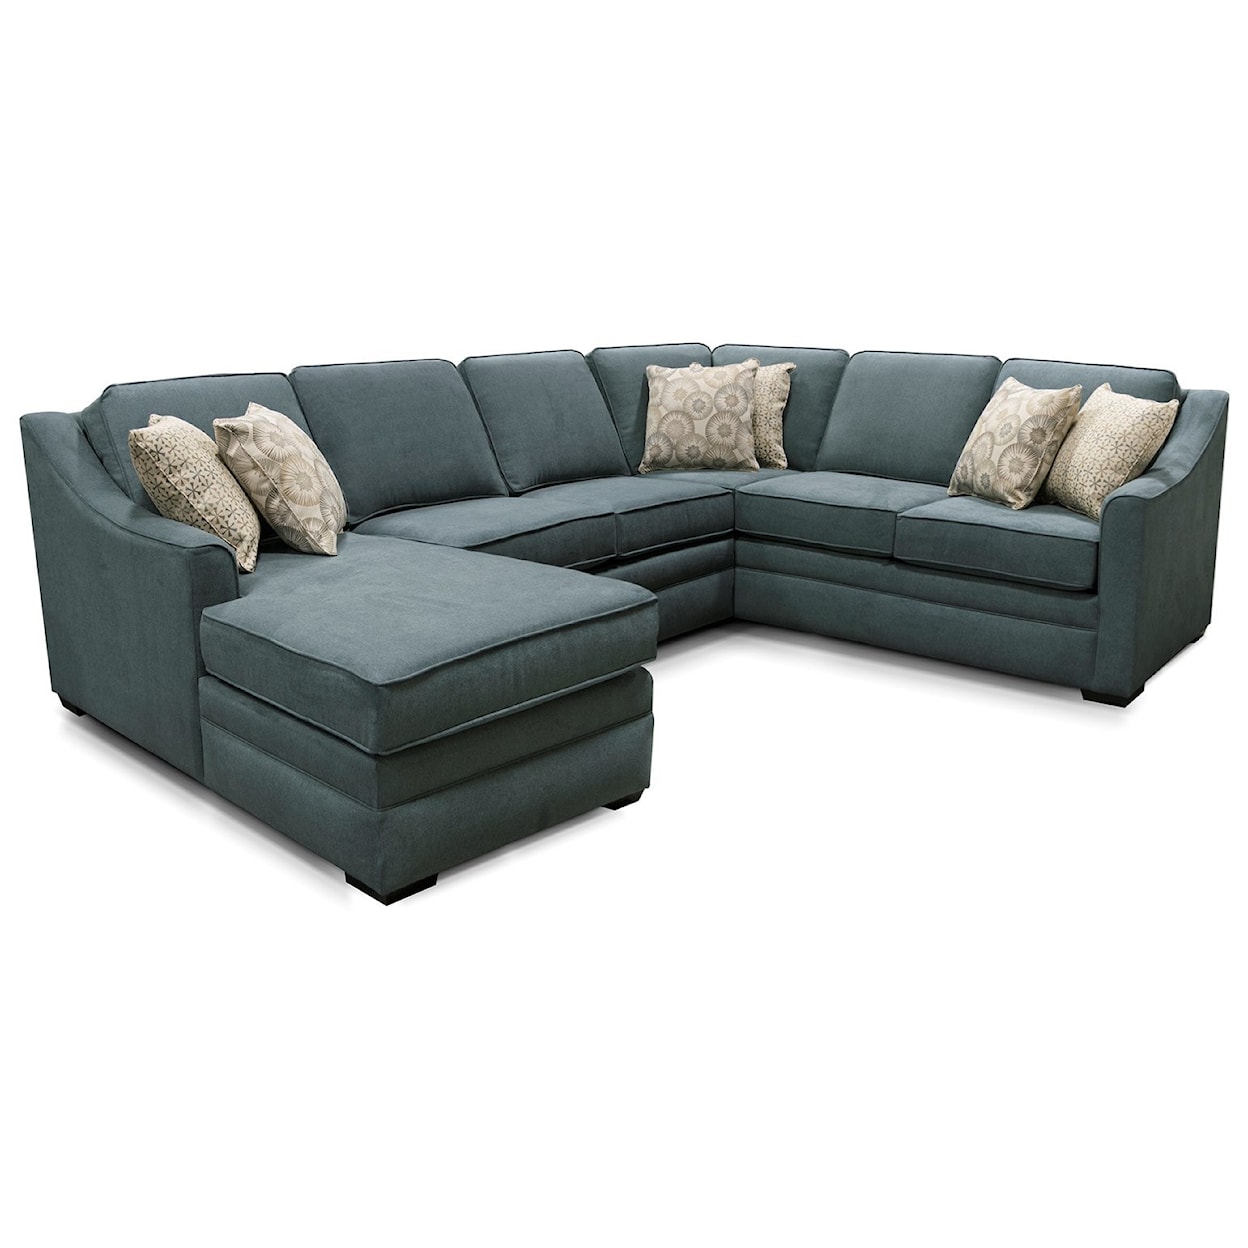 England 4T00 Series Sectional Sofa with Five Seats